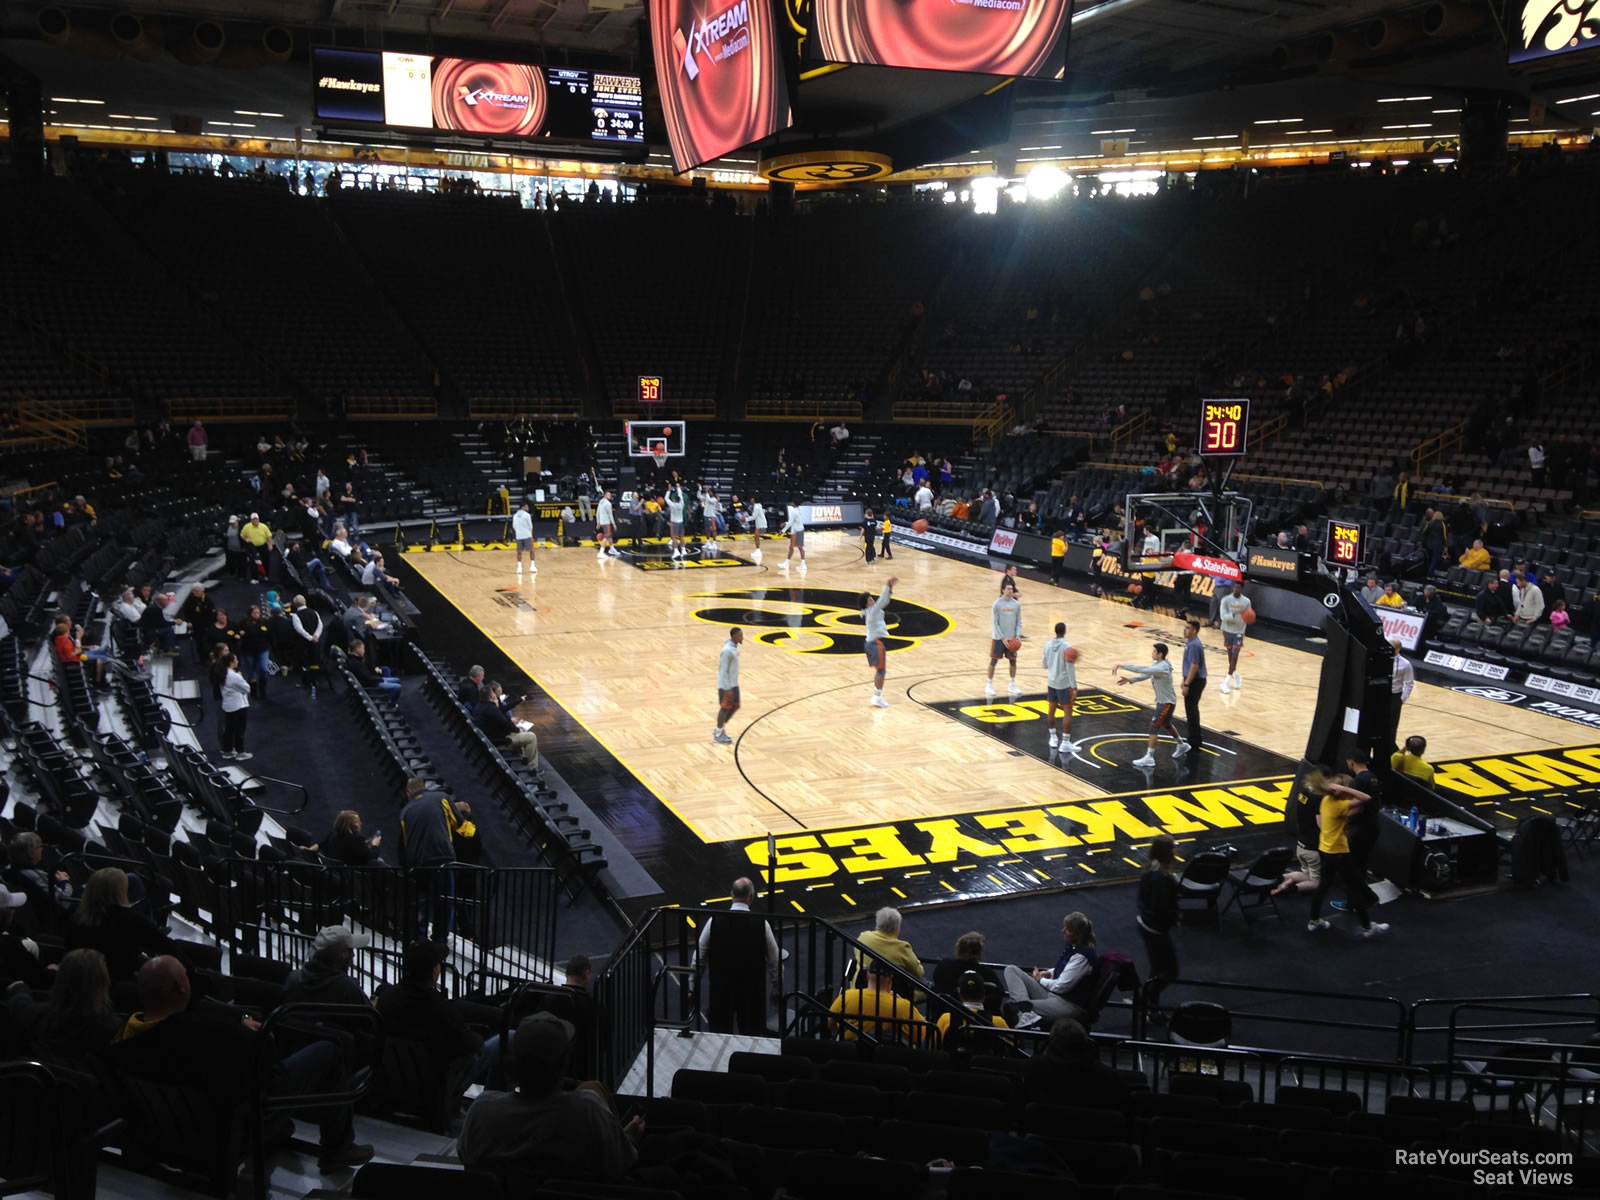 section ii, row 15 seat view  - carver-hawkeye arena